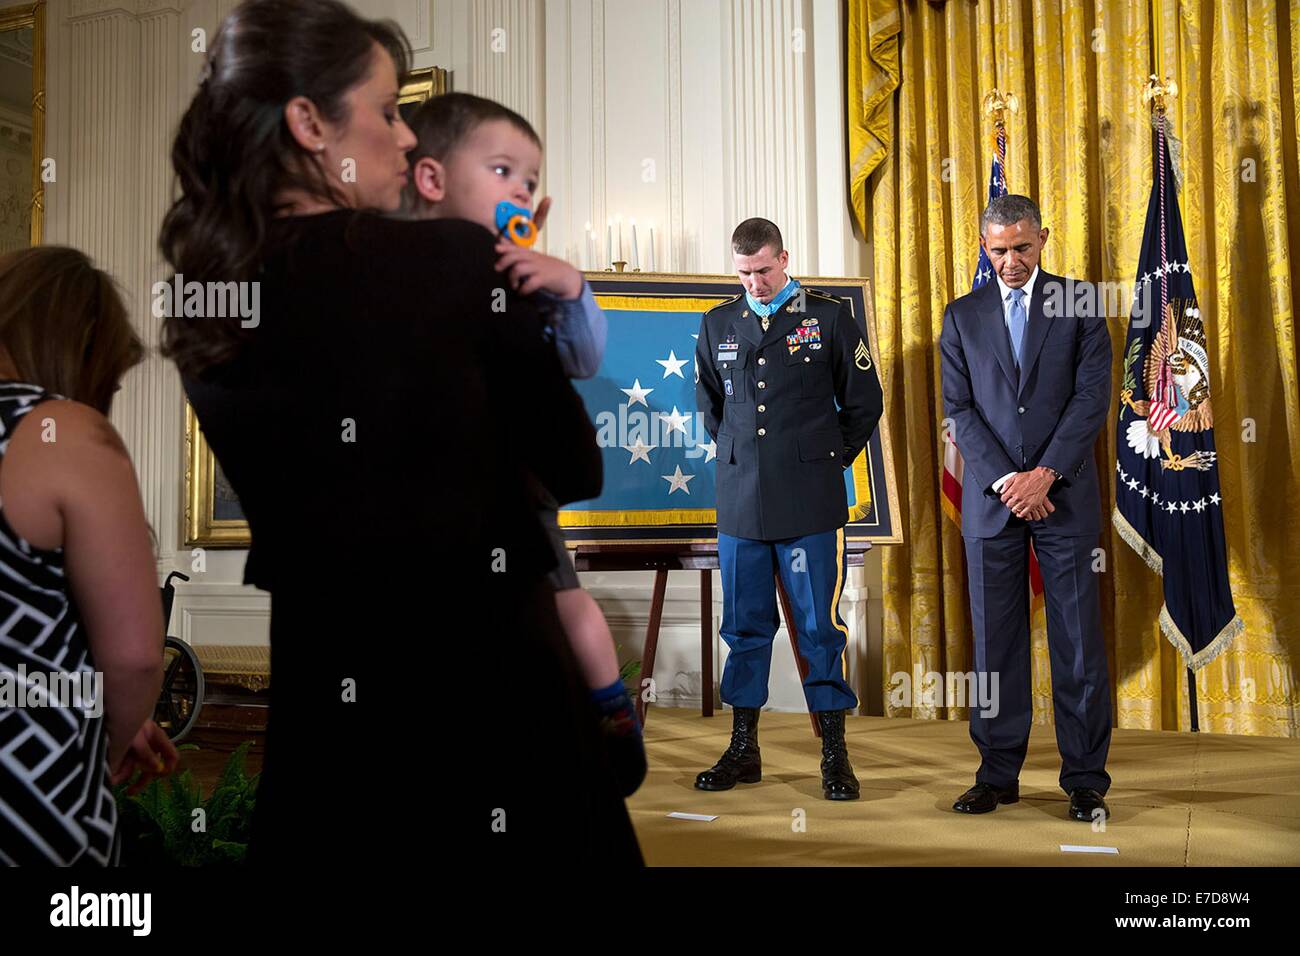 US President Barack Obama and Staff Sergeant Ryan M. Pitts bow their heads during the benediction following the Medal of Honor ceremony for SSG Pitts in the East Room of the White House July 21, 2014 in Washington, DC.  At left is SSG Pitt's wife Amy and one-year-old son Lucas. Stock Photo